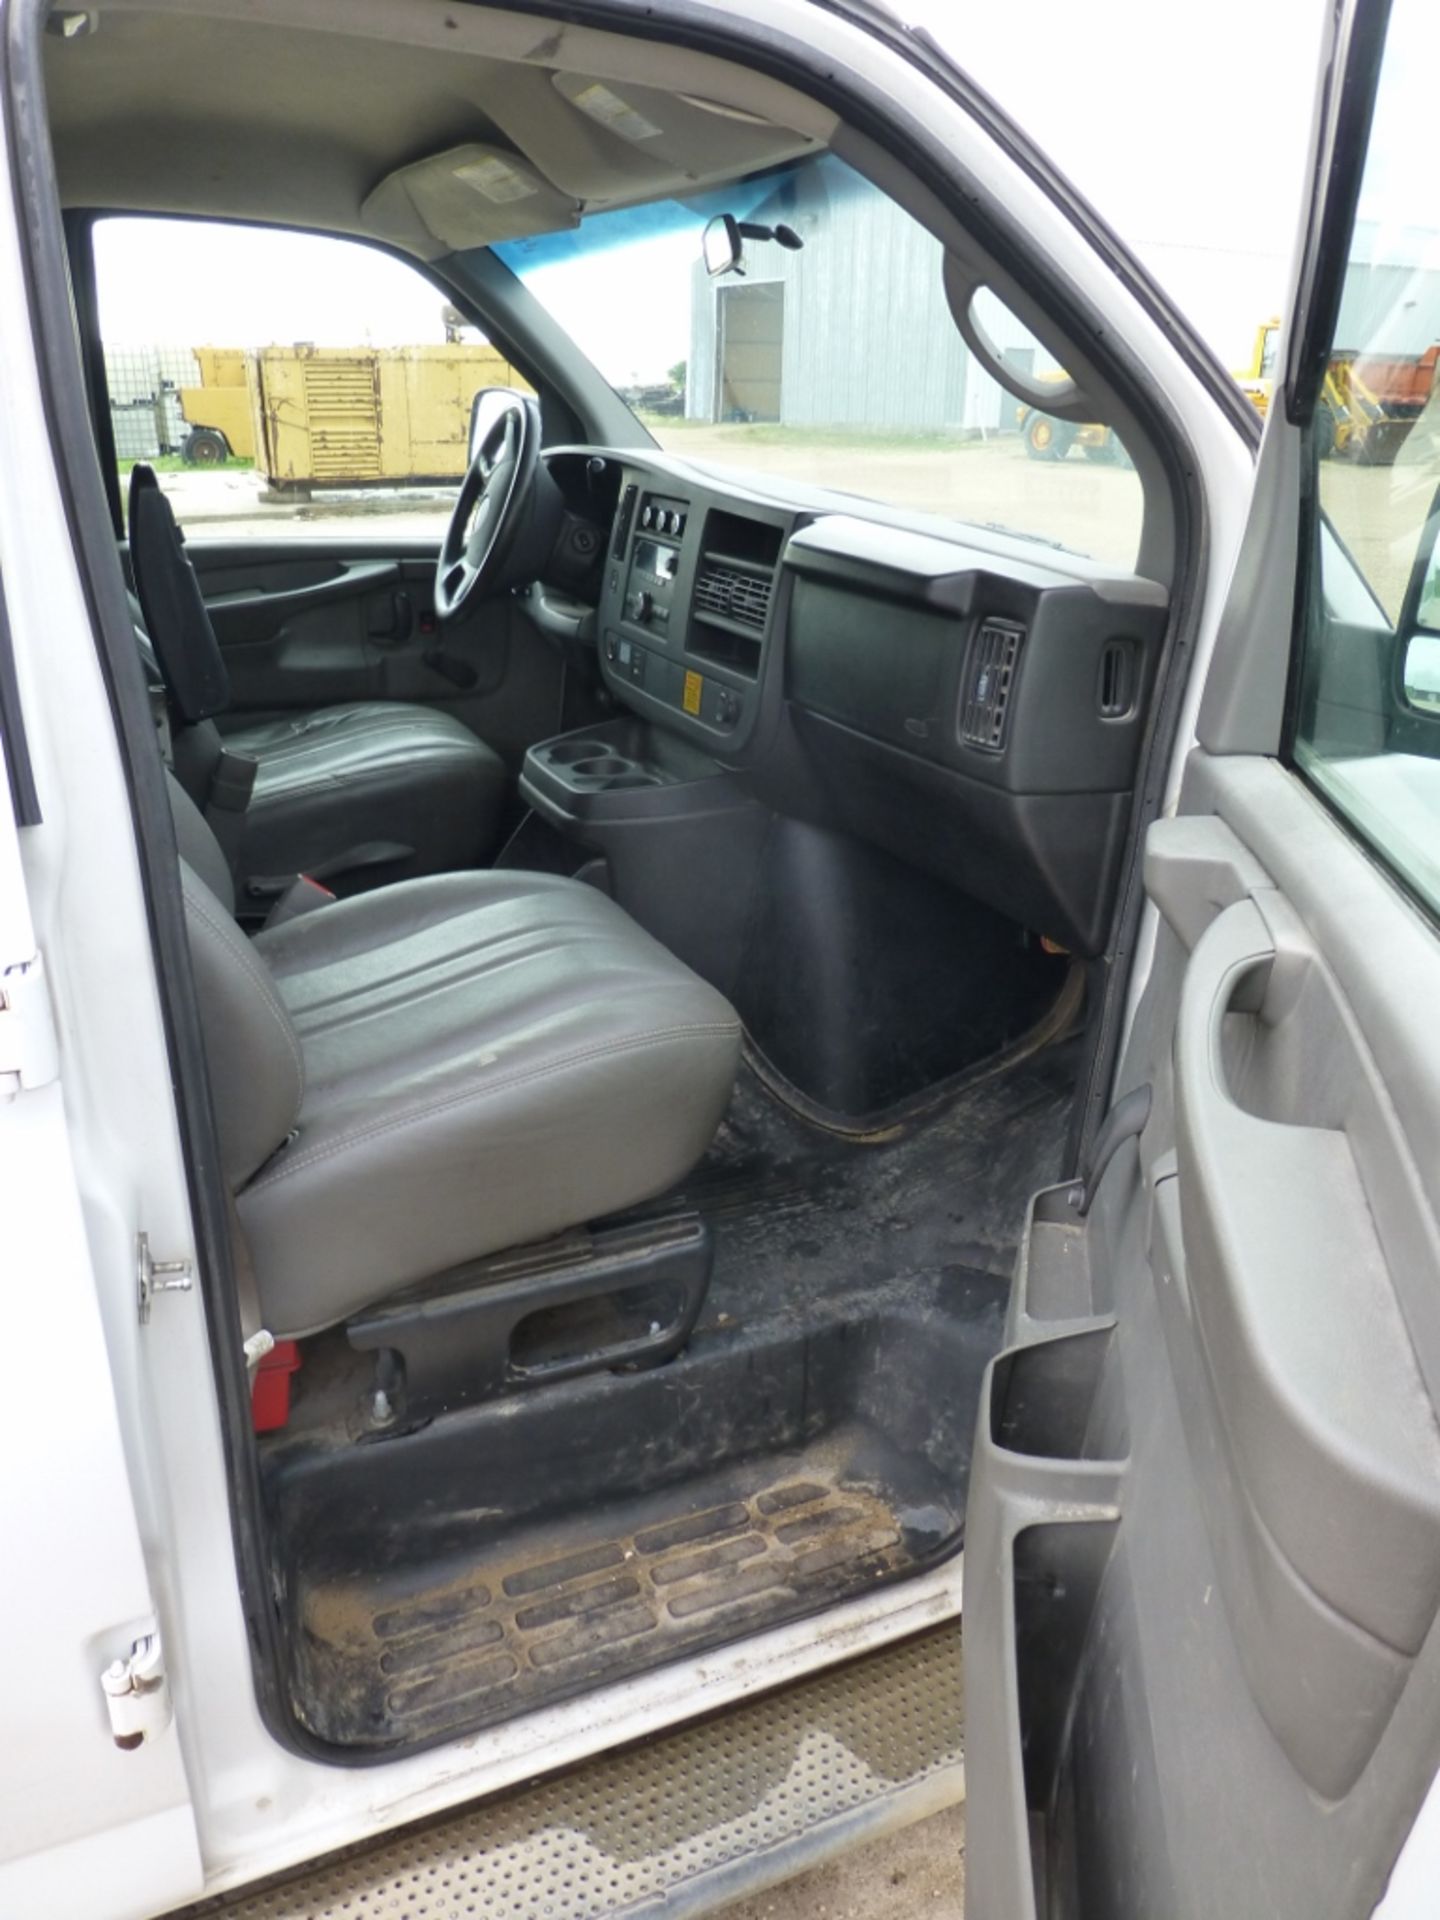 2008 GMC Cargo van, with shelf drawer units, automatic, a.c., manual windows, 254,605 unverified - Image 3 of 22